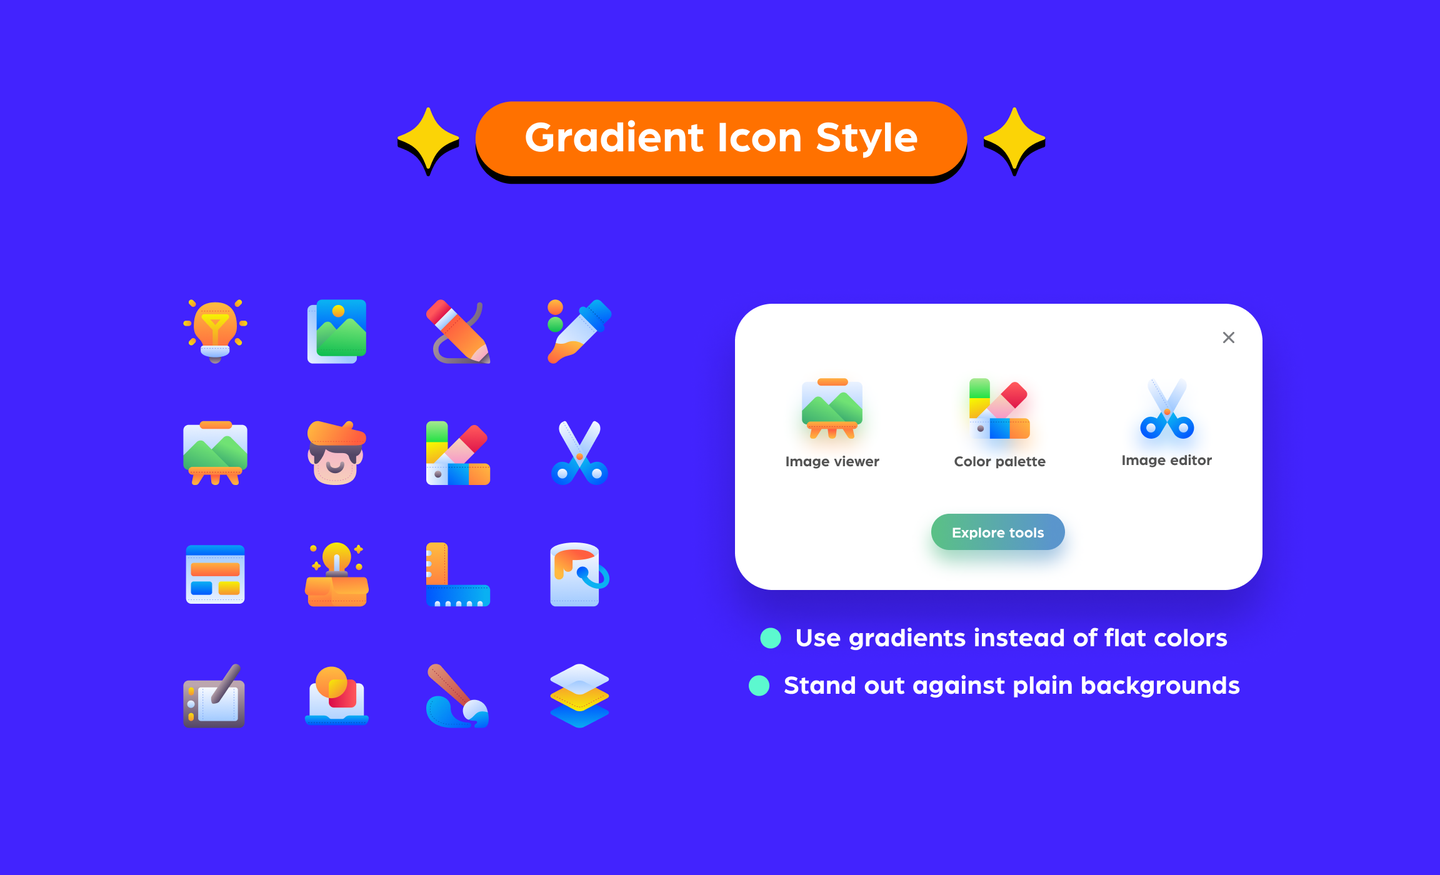 A guide to the gradient icon style